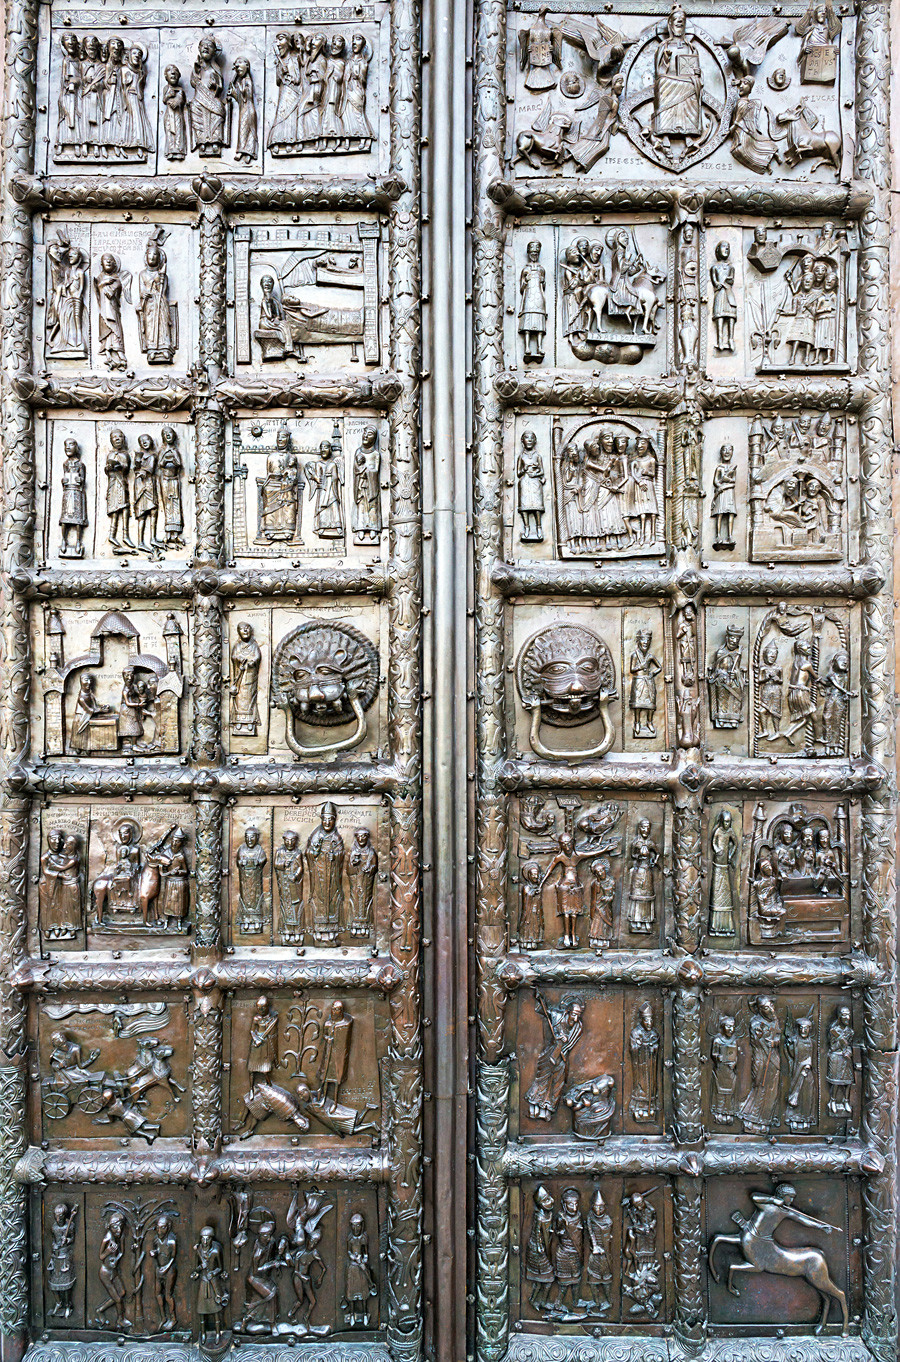 The Sigtuna, or Magdeburg Gates that were taken as loot from Sigtuna. Now, the gates are at the West Entrance to the St. Sophia cathedral in Novgorod, Russia.